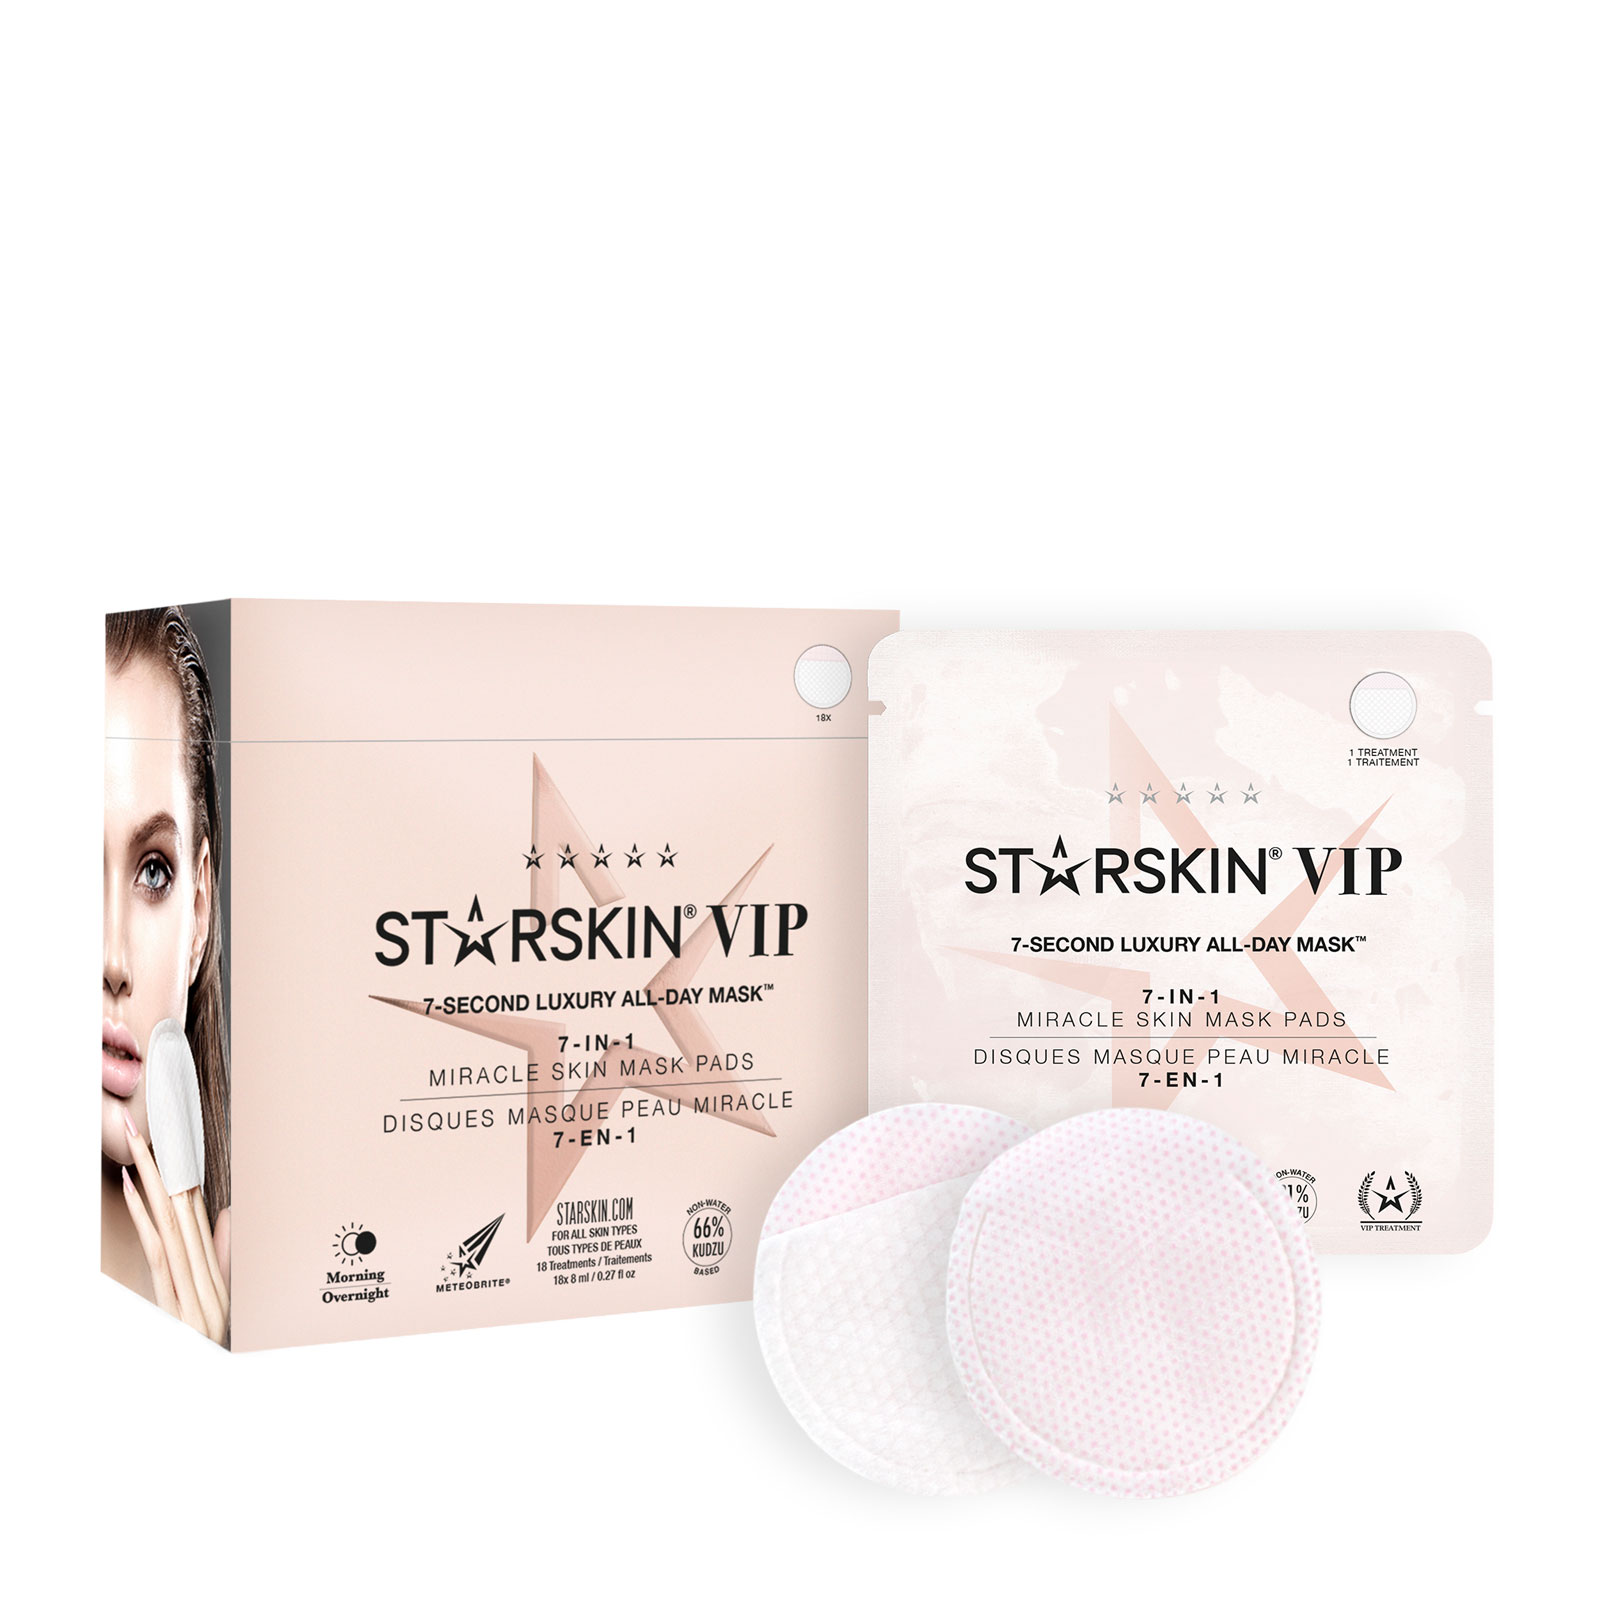 Starskin Vip 7-Second Luxury All-Day Mask 18 Pack